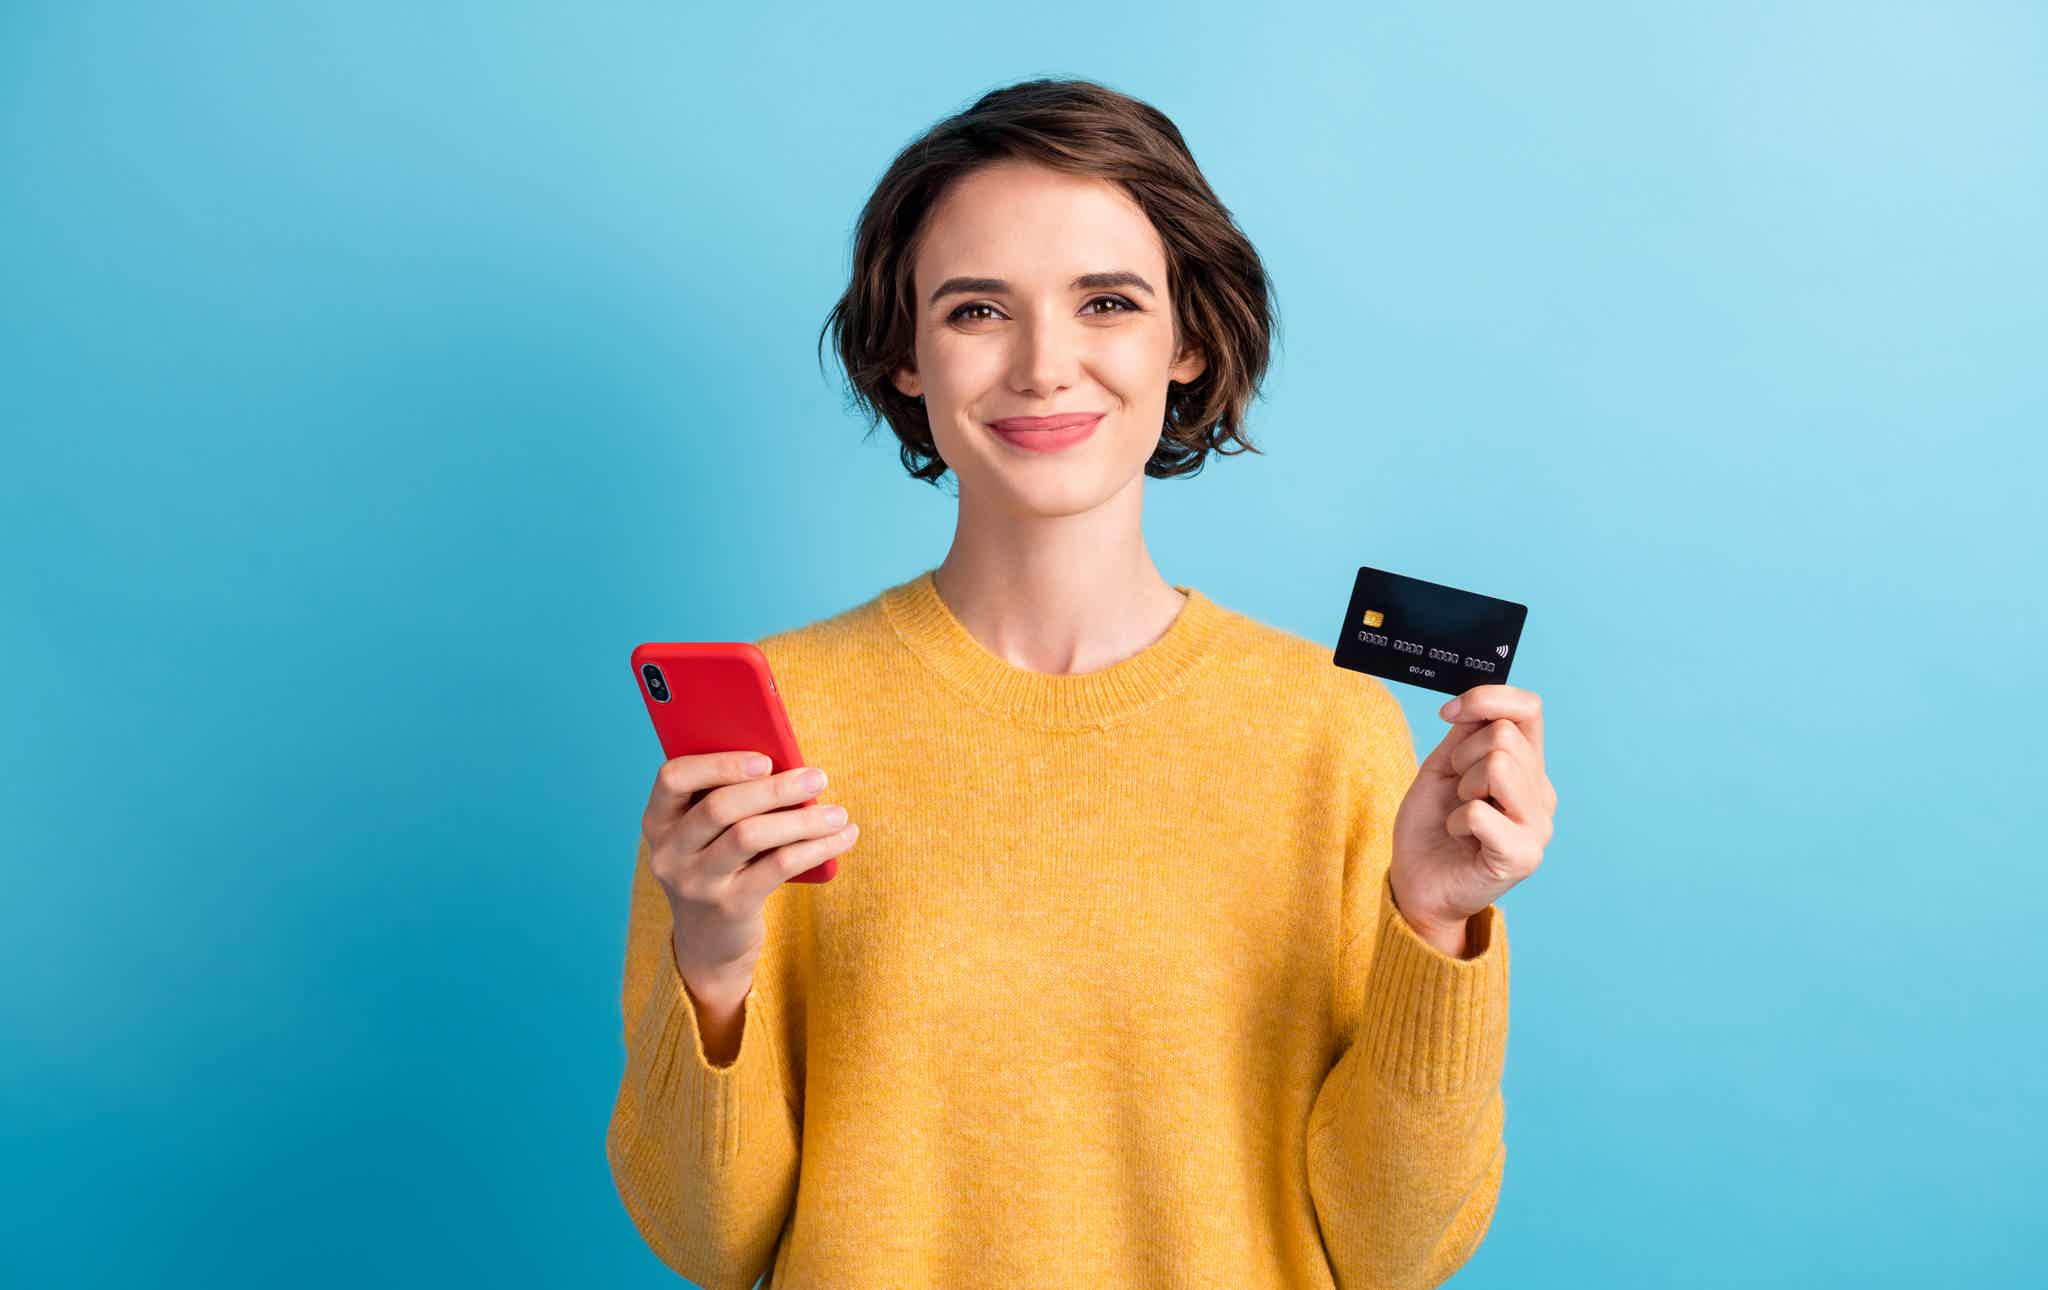 Need a credit card ASAP? This list has the best ones. Source: Adobe Stock.